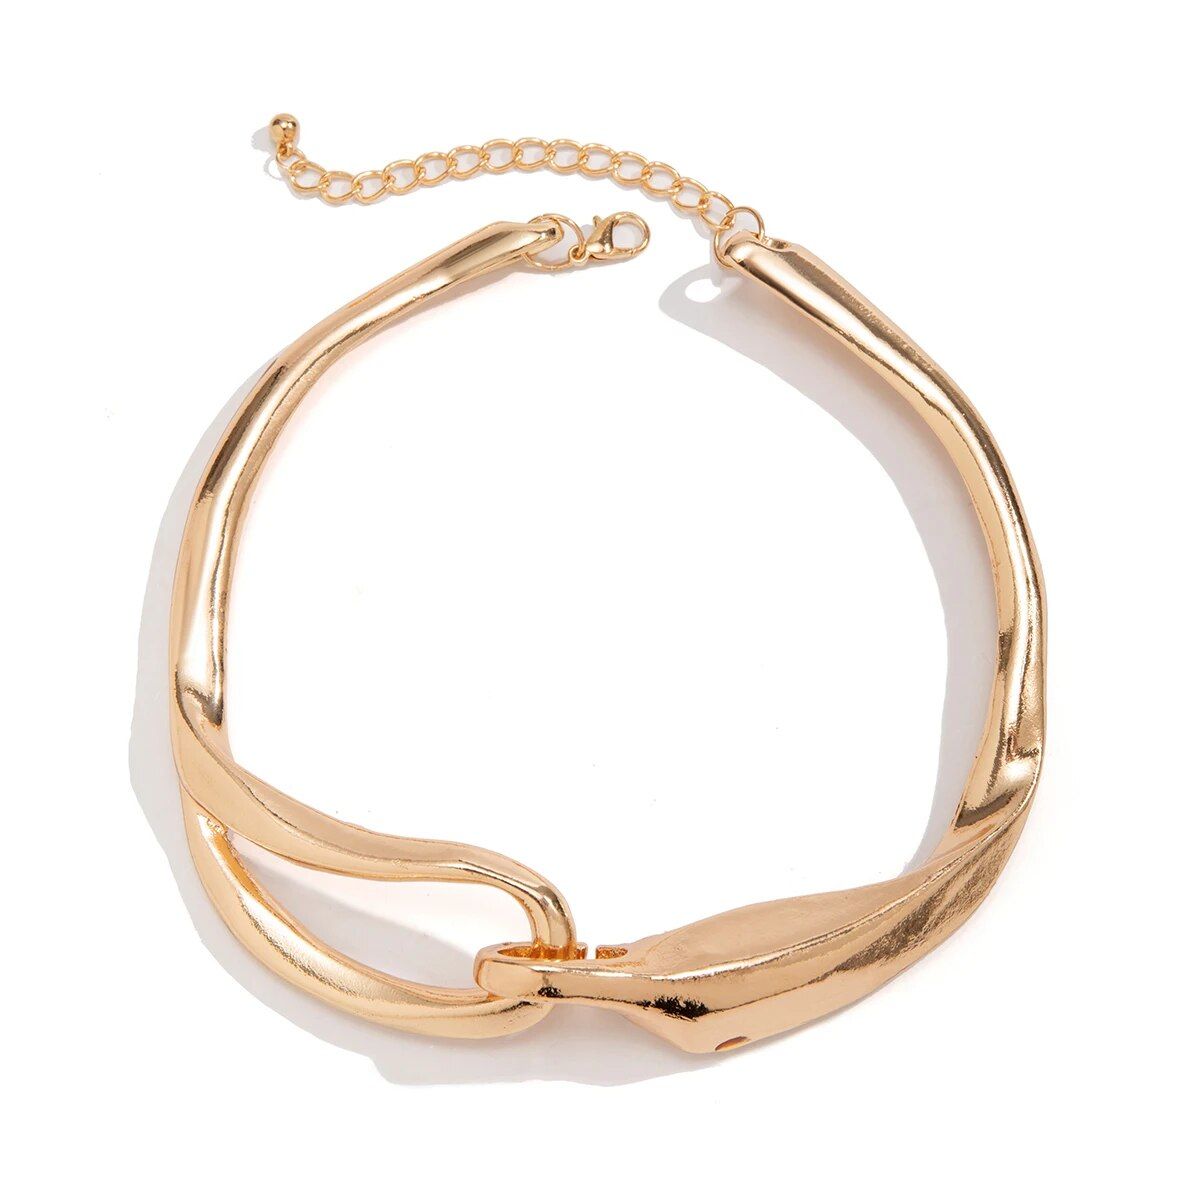 Chunky Metal Buckle Gold Choker Necklace reflecting new fashion trends, with a twisted design, featuring a glossy finish and adjustable chain, isolated on a white background.